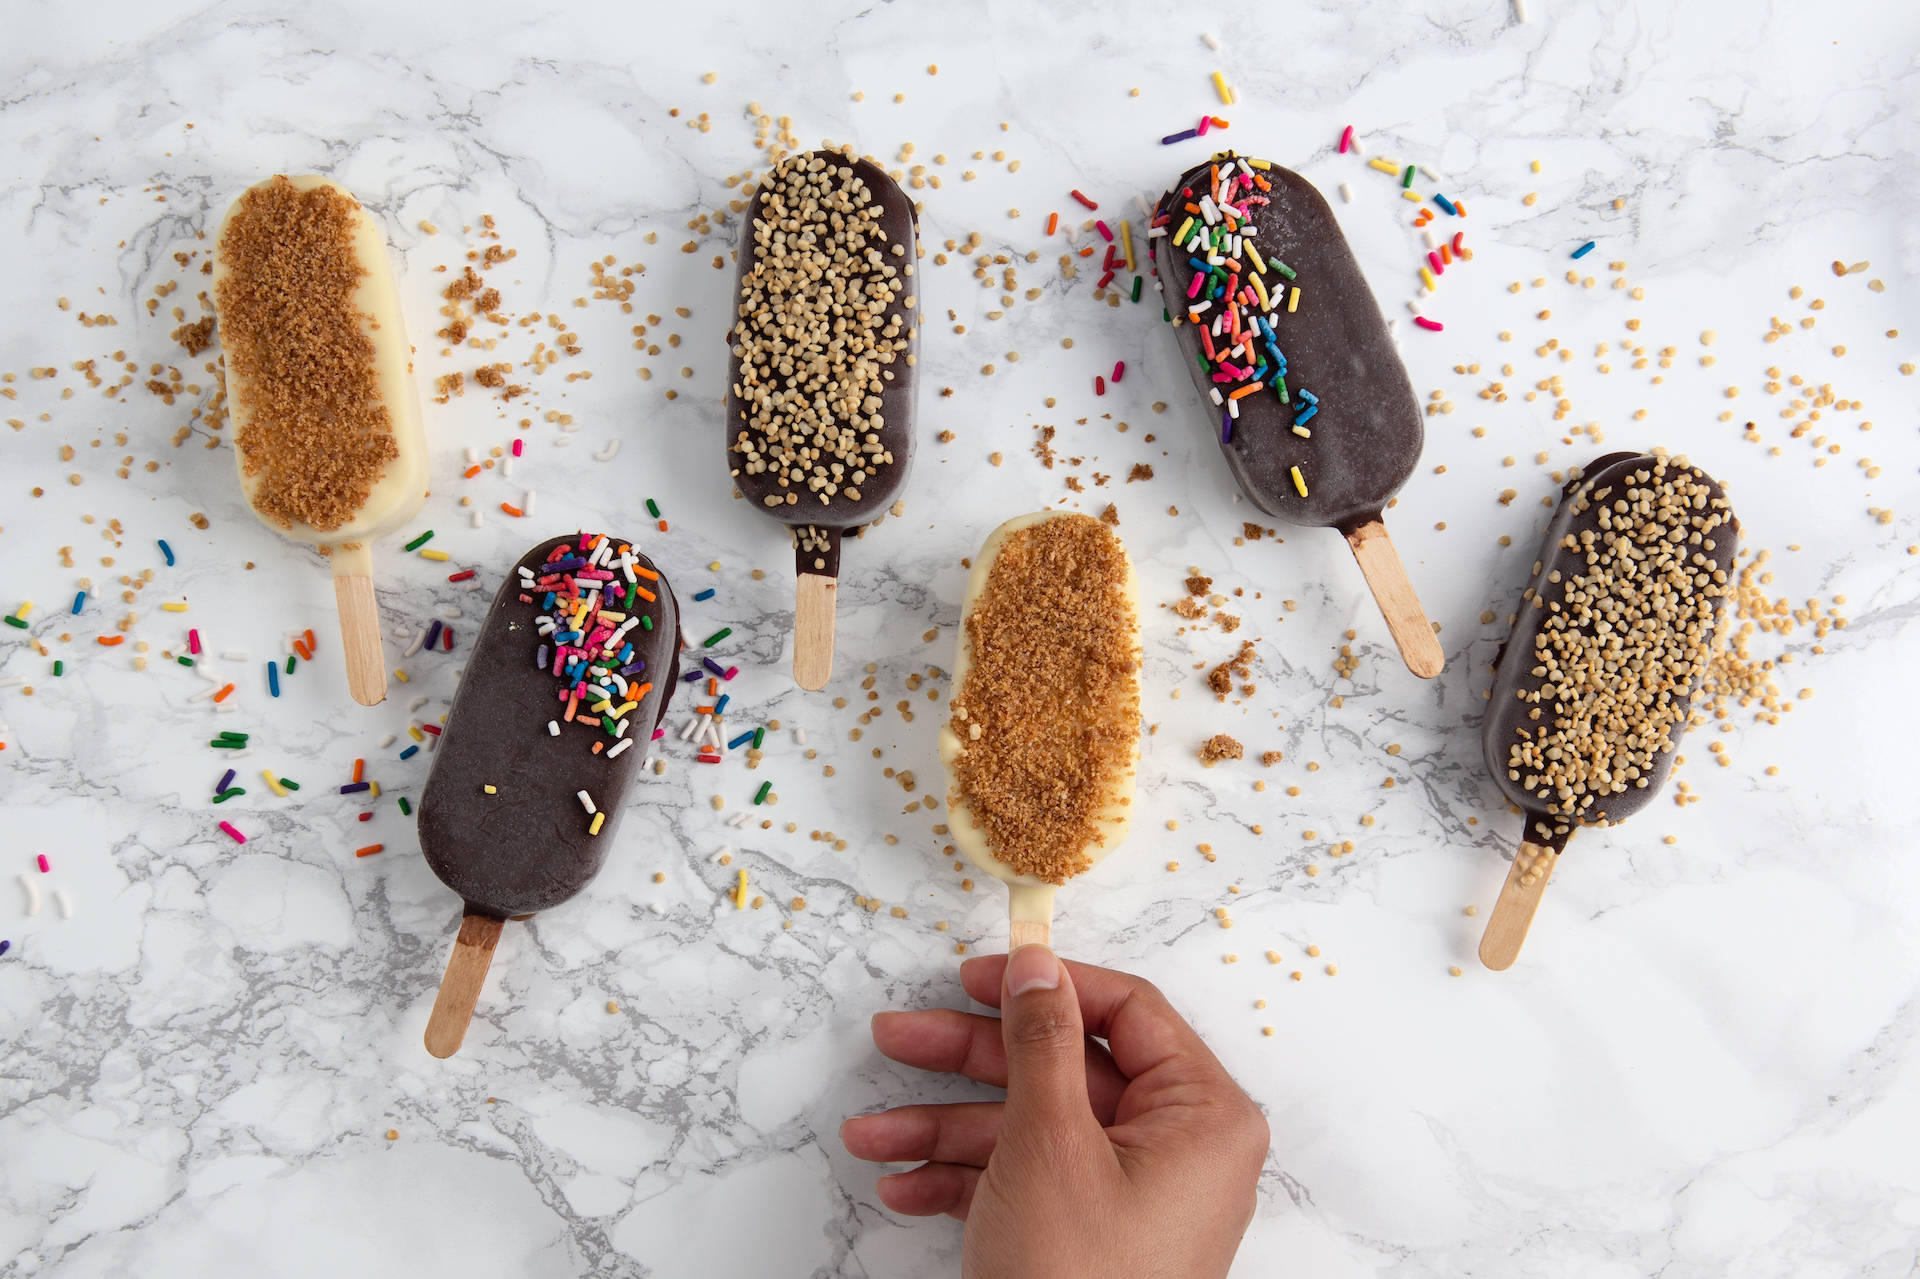 The first 100 guests on June 2 will get a complimentary Ice Cream Bar.